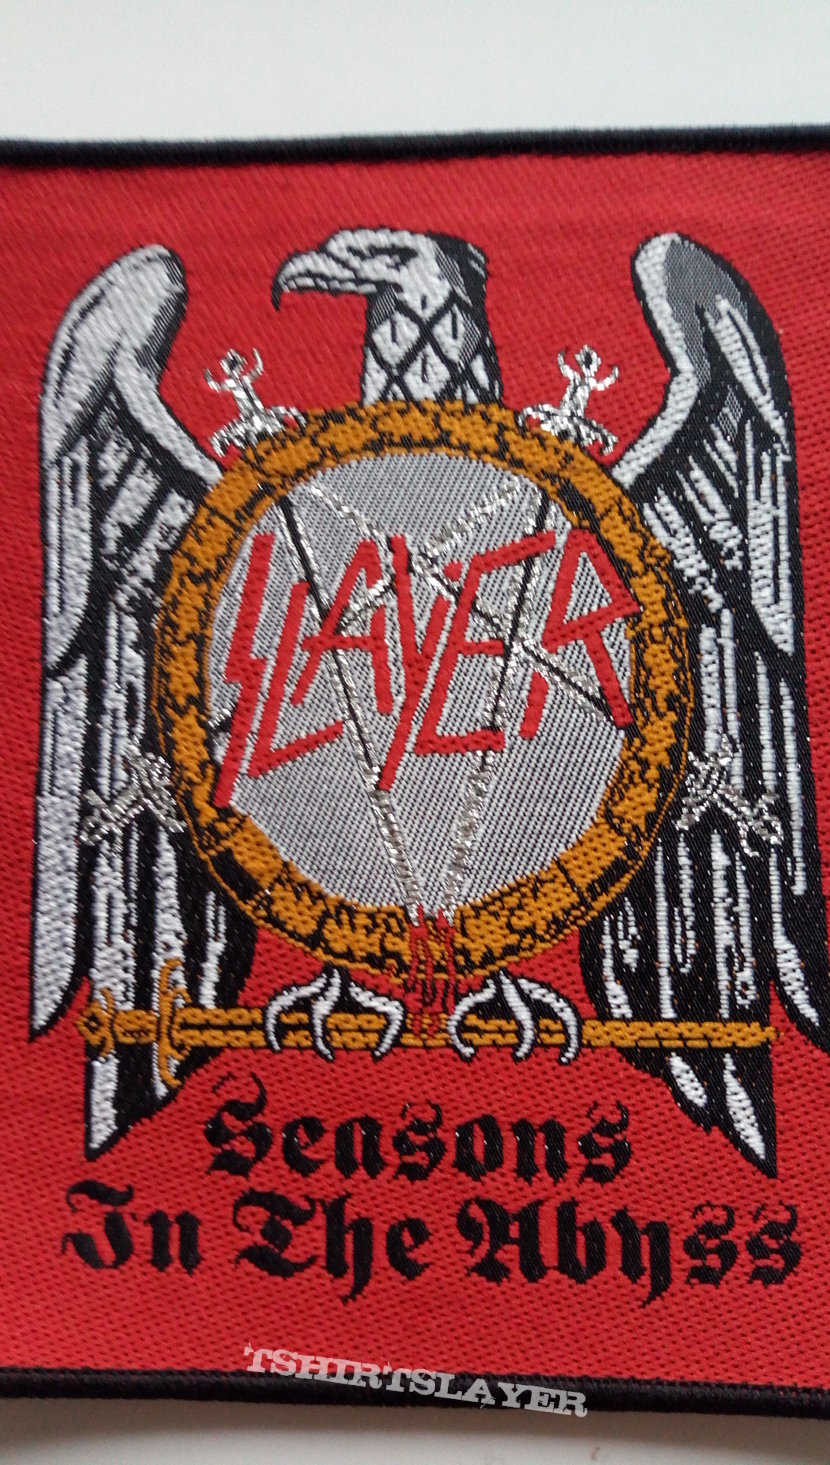 SLAYER  seasons in the abyss patch 66  9x11 cm swords with silver glitter print